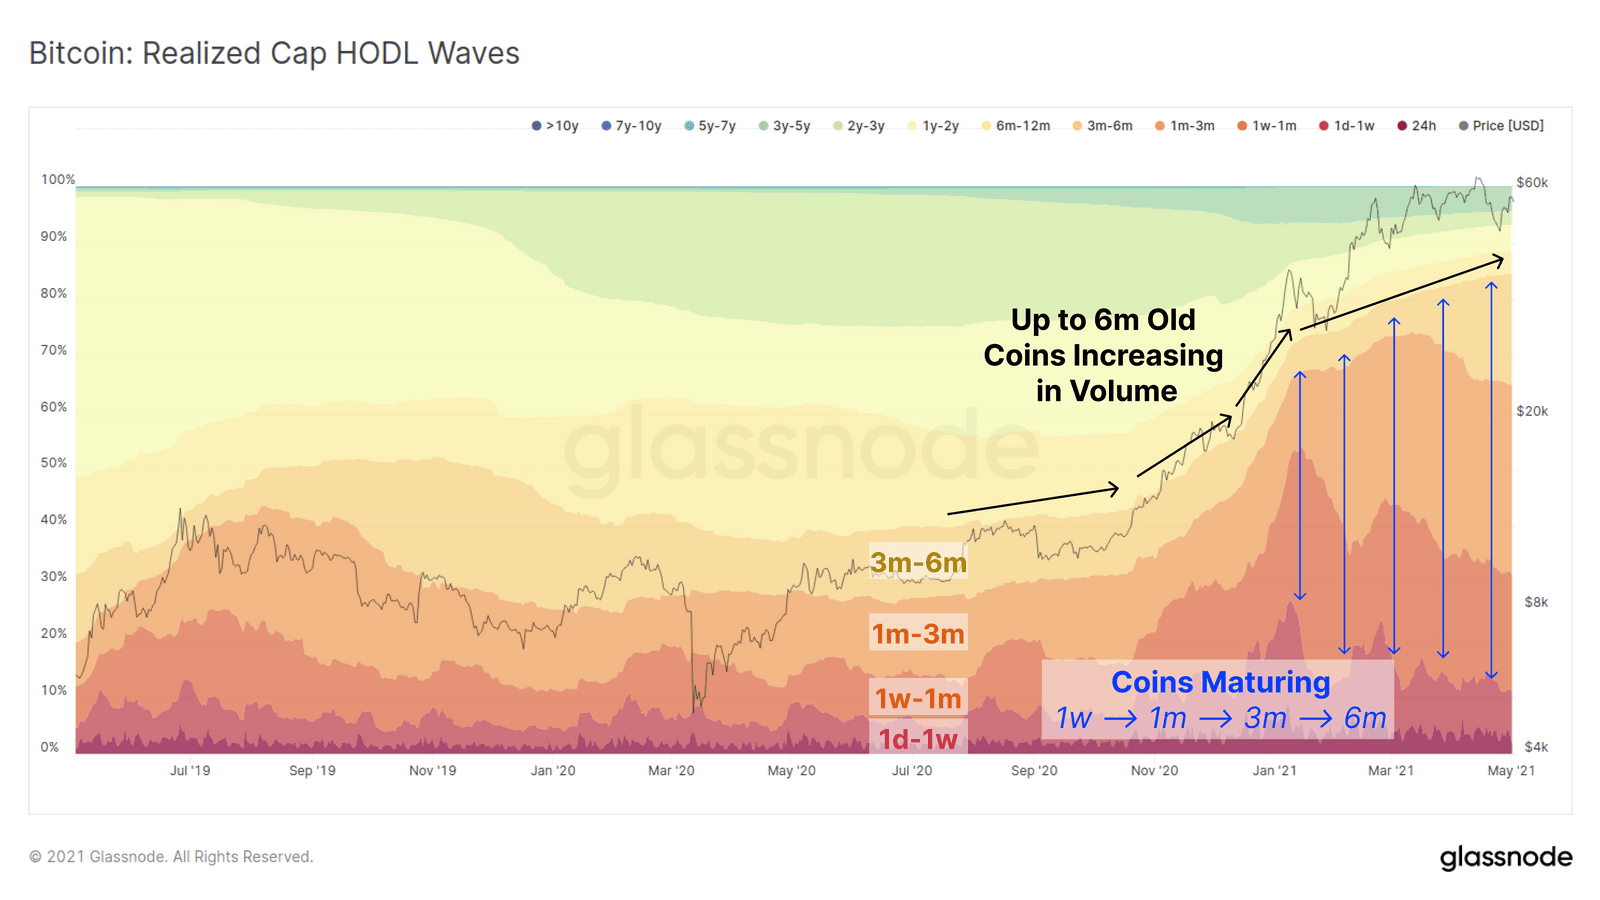 realized cap hodl waves